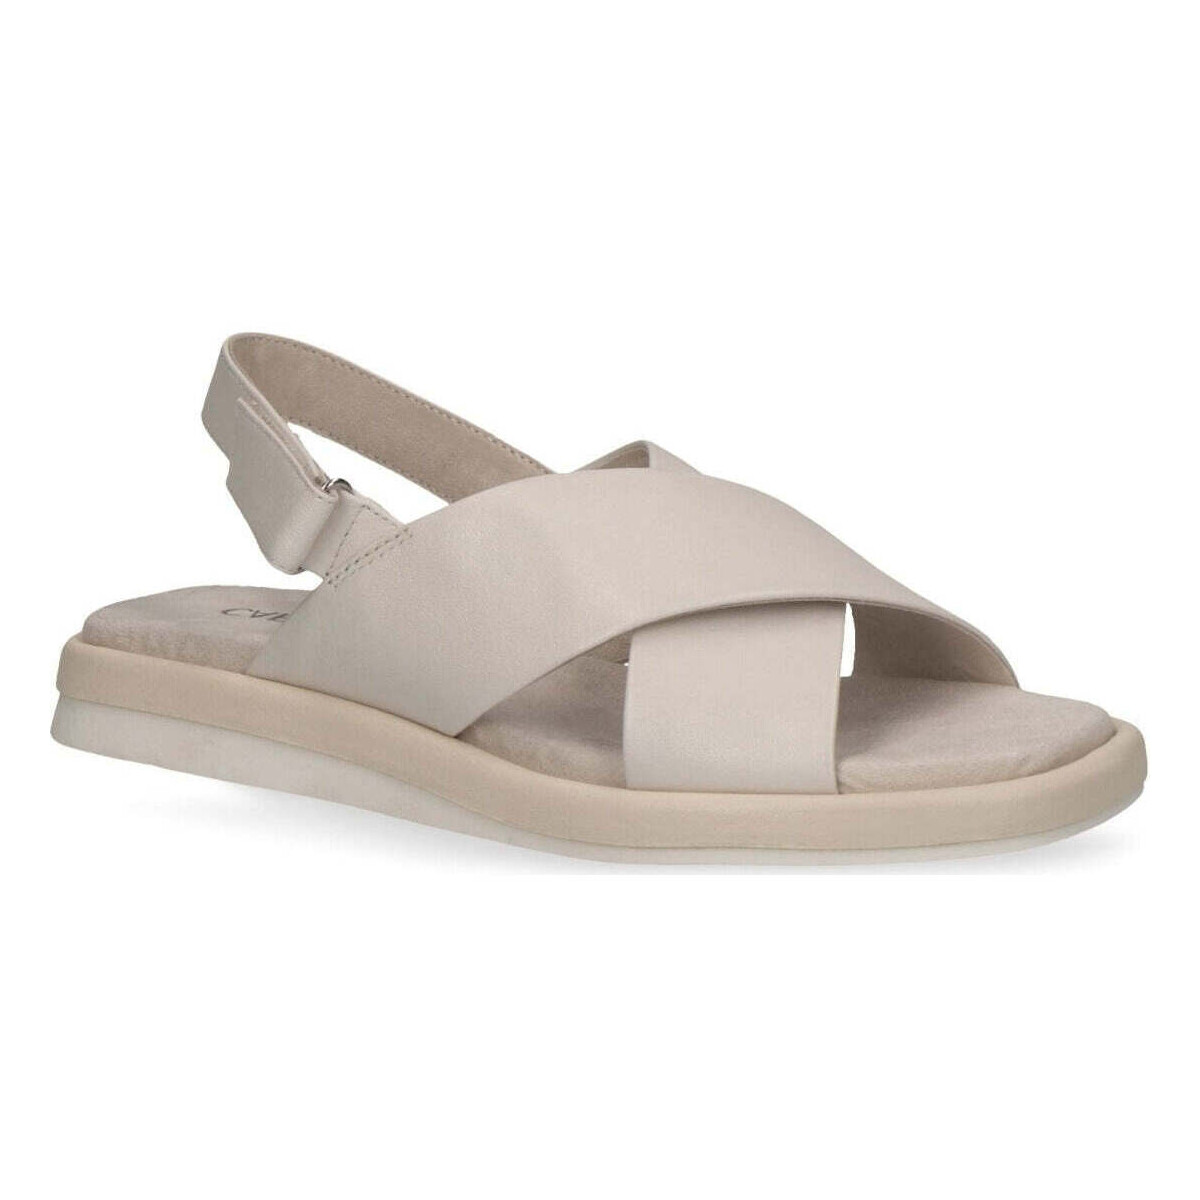 Chaussures Femme Sandales sport Caprice offwhite nappa casual open sandals Beige